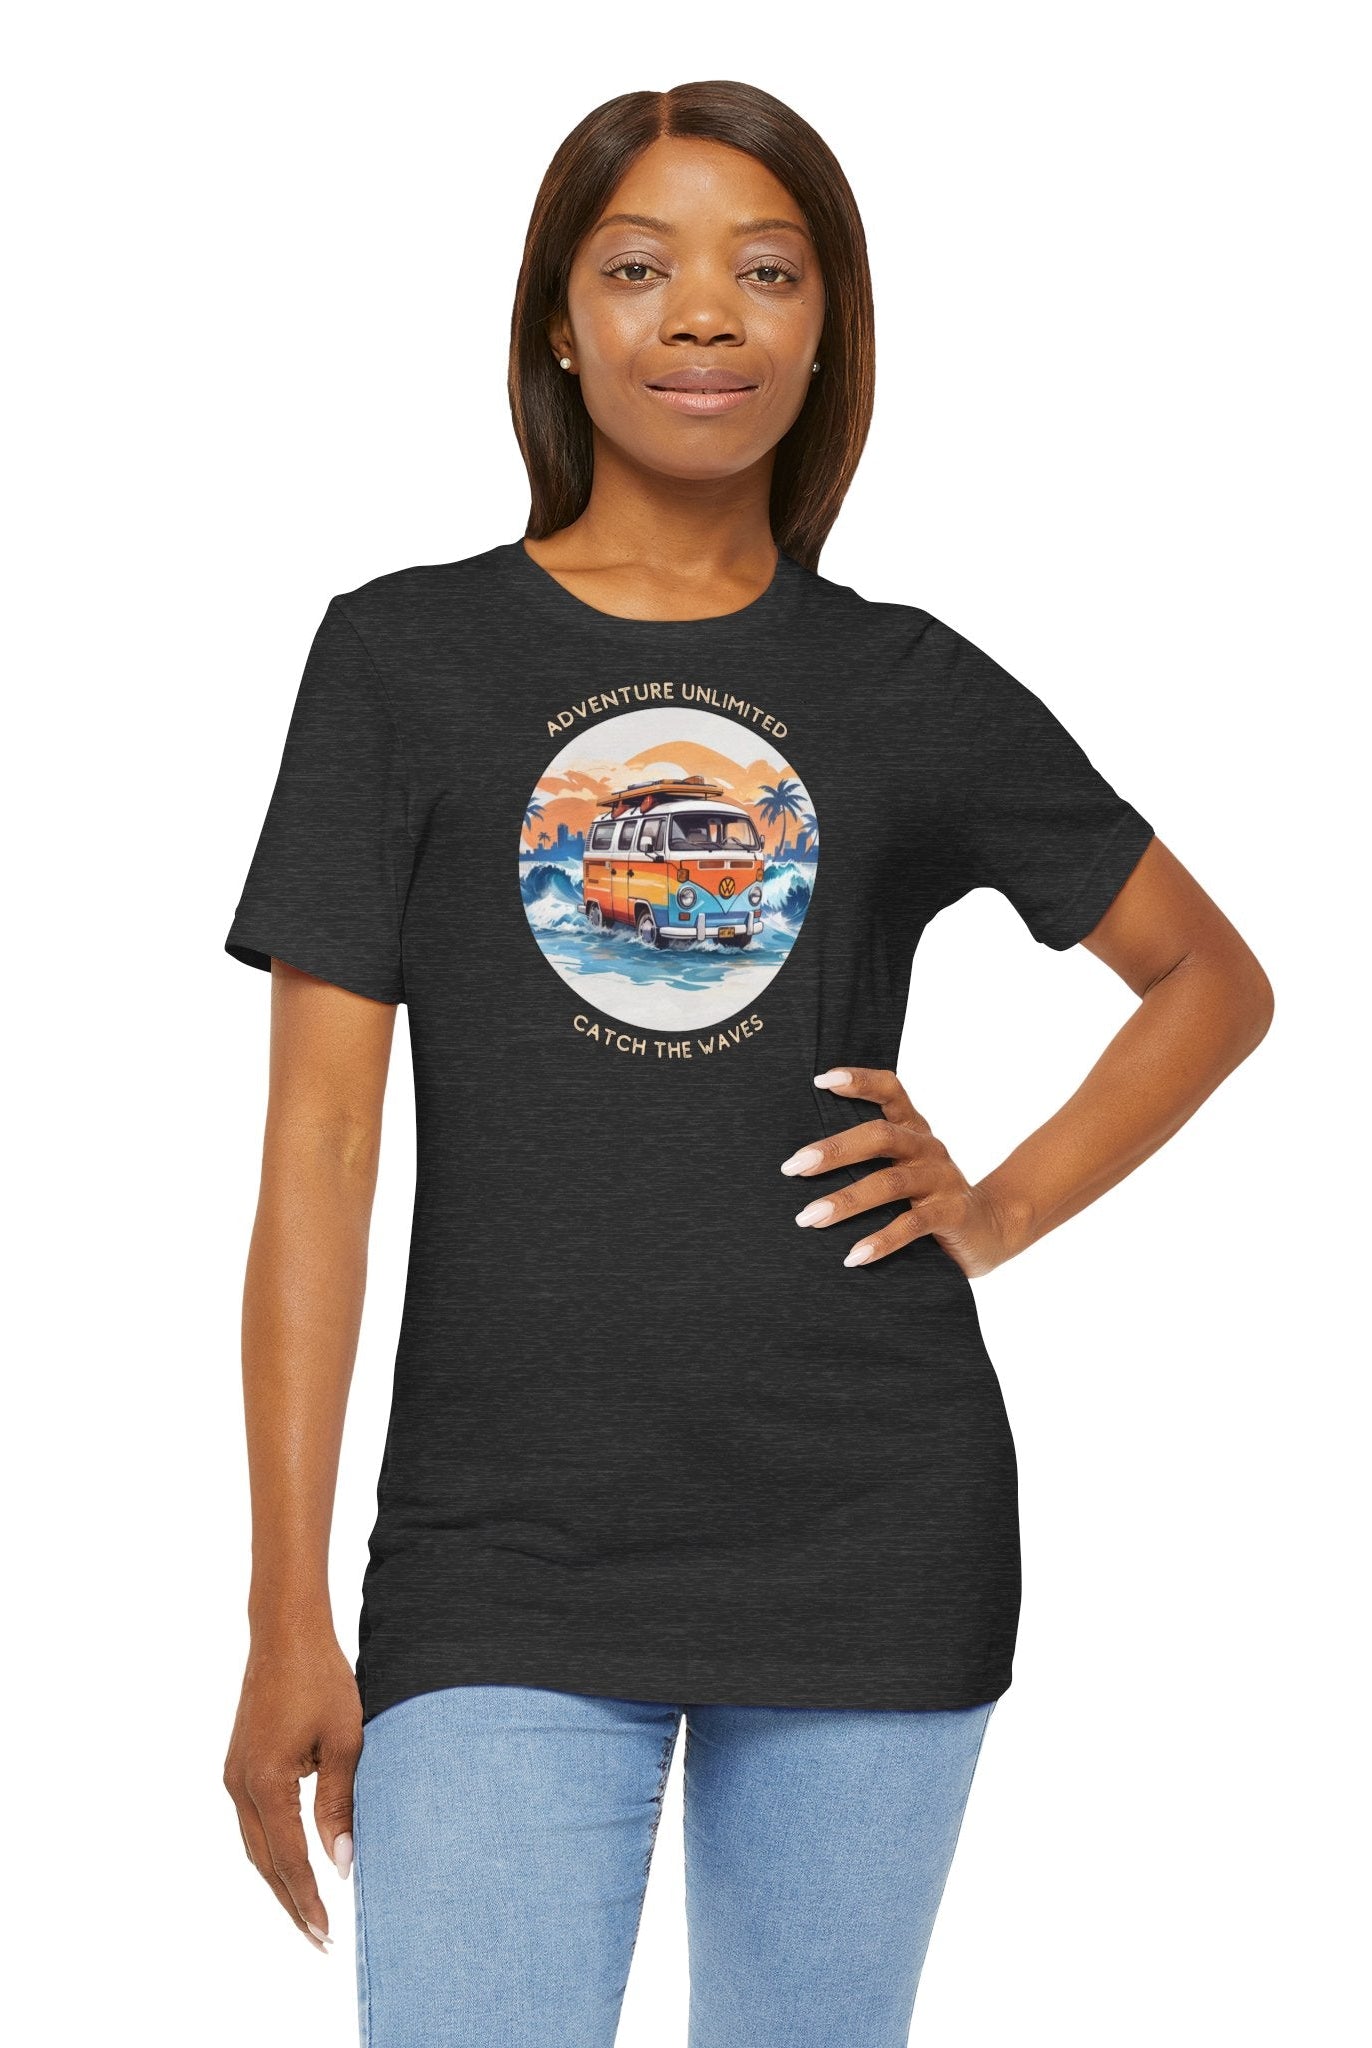 Adventure Unlimited - Surfing T-Shirt by Soulshinecreators, woman in black ’i’m’t-shirt